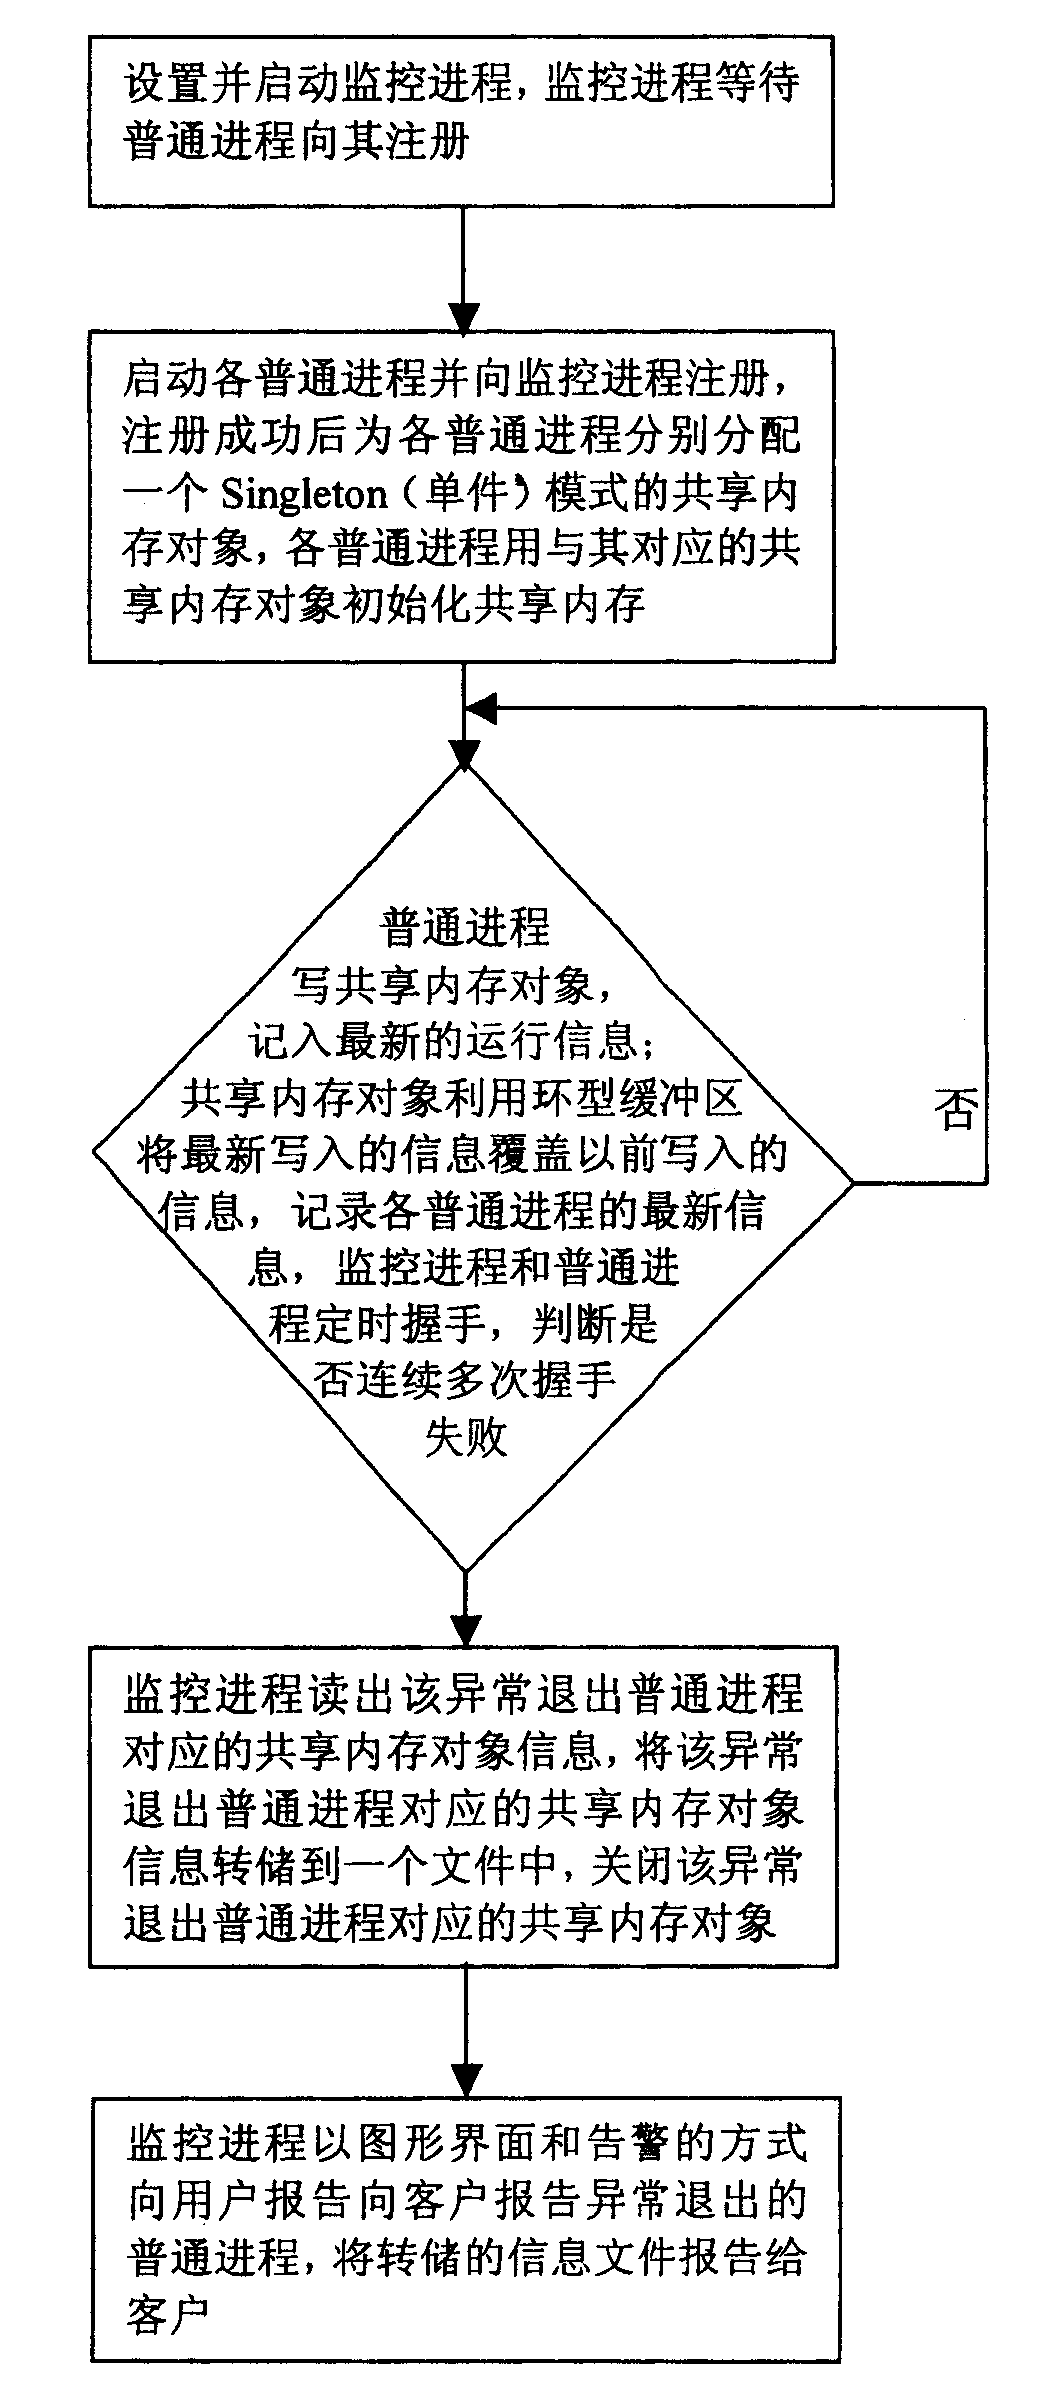 Positioning method of recording general progress anomal recede using sharing core-object